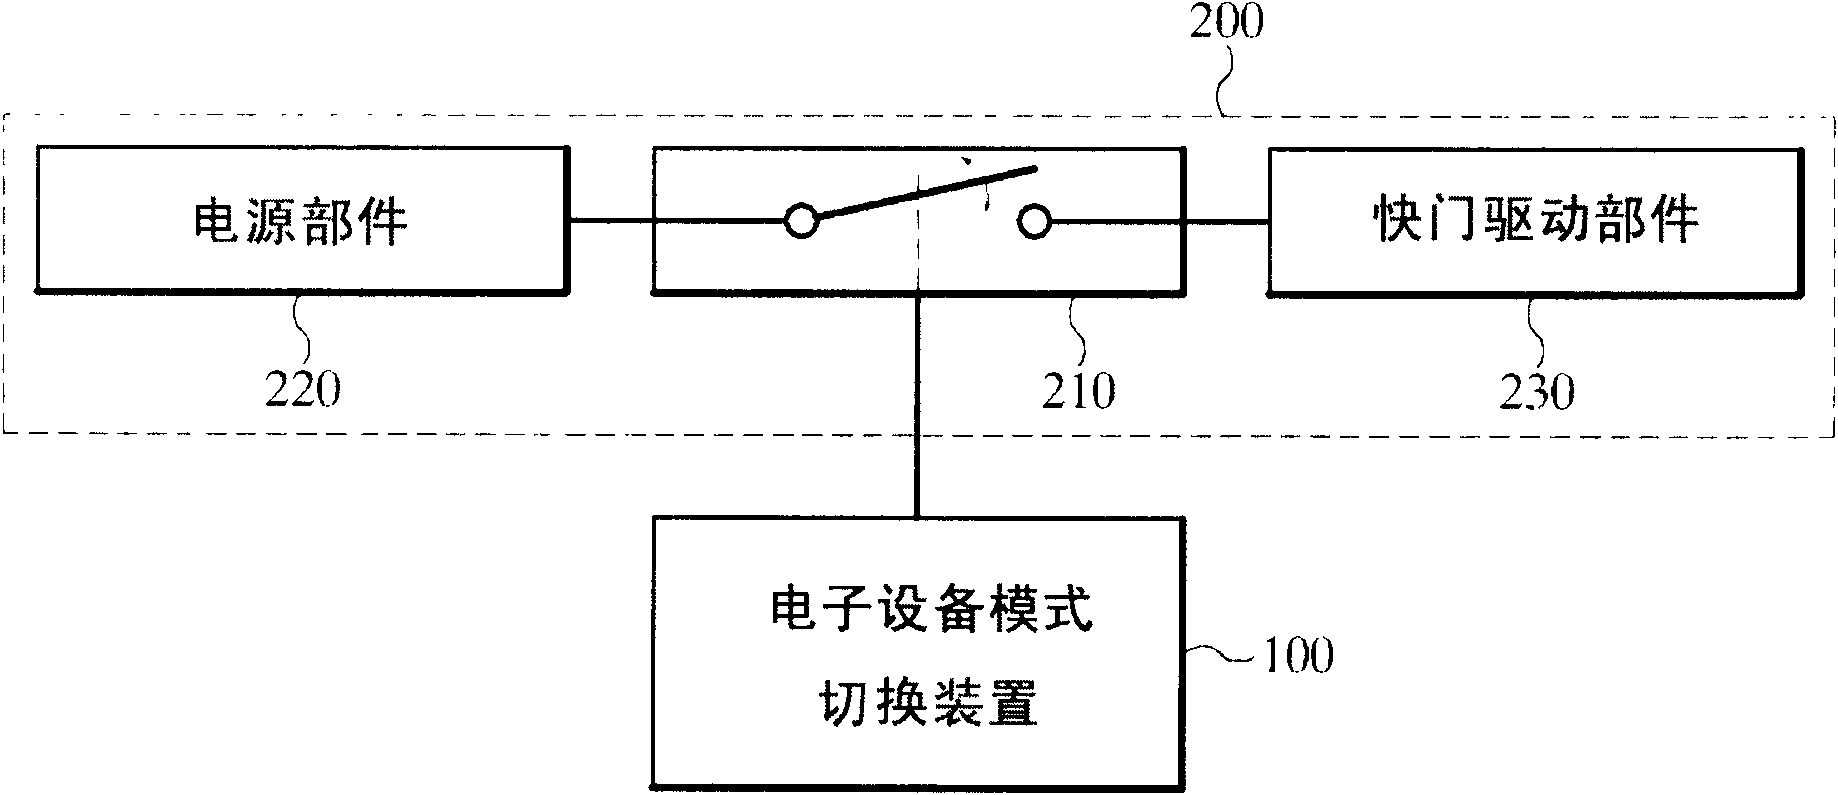 Electronic equipment mode switching apparatus and method based on skin contact